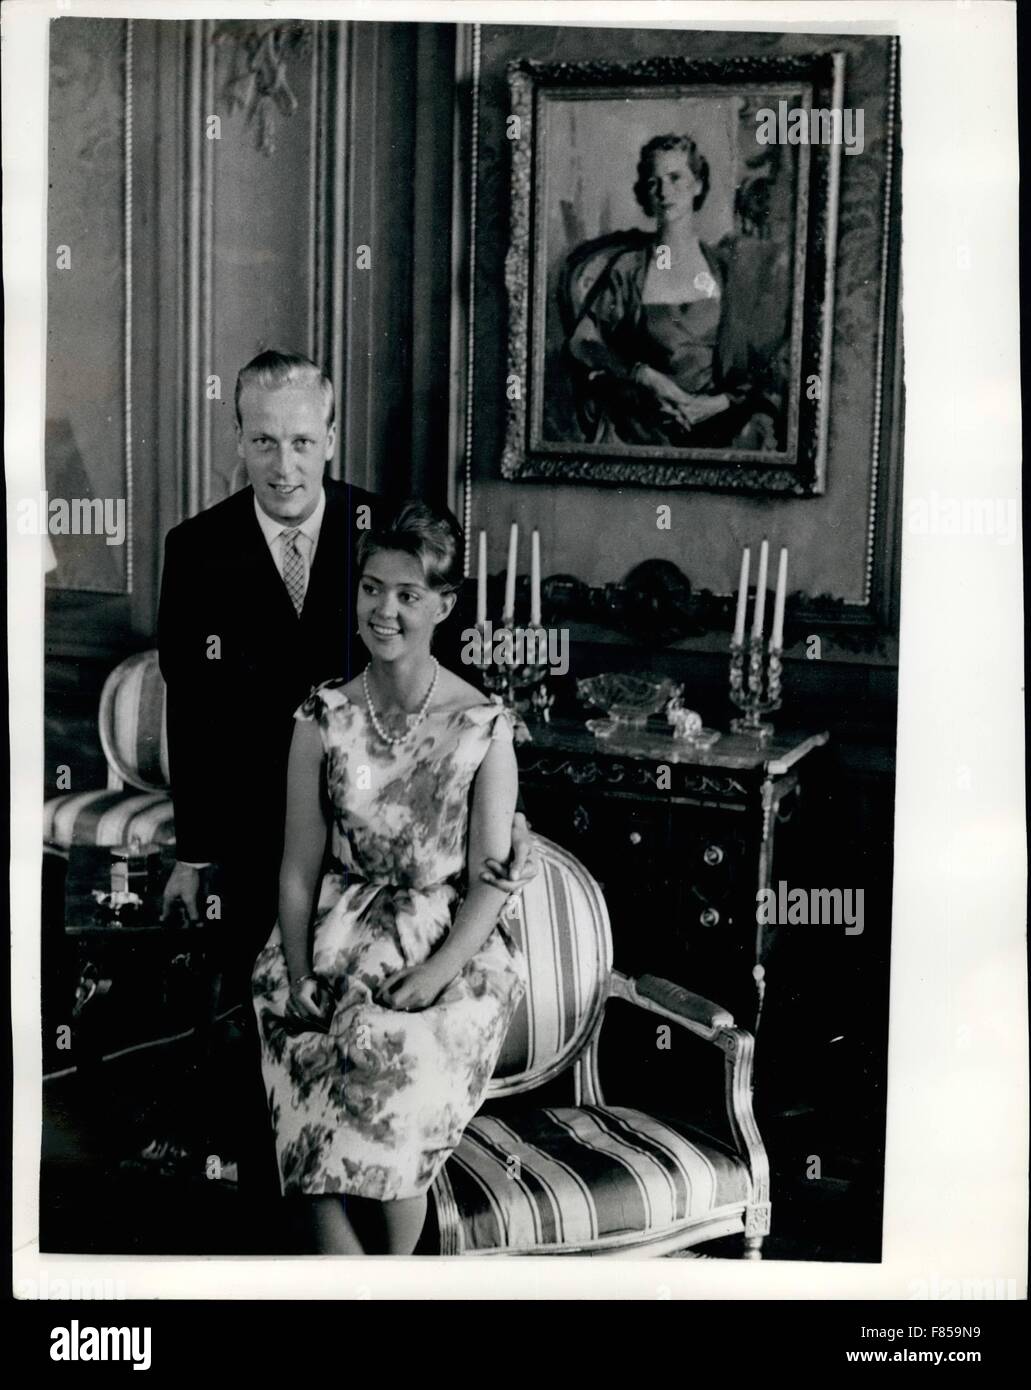 1968 - Princess Birgitta of Sweden - Prepares for Her Marriage. New picture taken specially in honour of the forthcoming marriage of Princess Birgitta of Sweden and Prince Hohann George of Hohenzollern and shows the Prince and Princess in the Royal Palace of Stockholm. They are to marry on May 25th. © Keystone Pictures USA/ZUMAPRESS.com/Alamy Live News Stock Photo